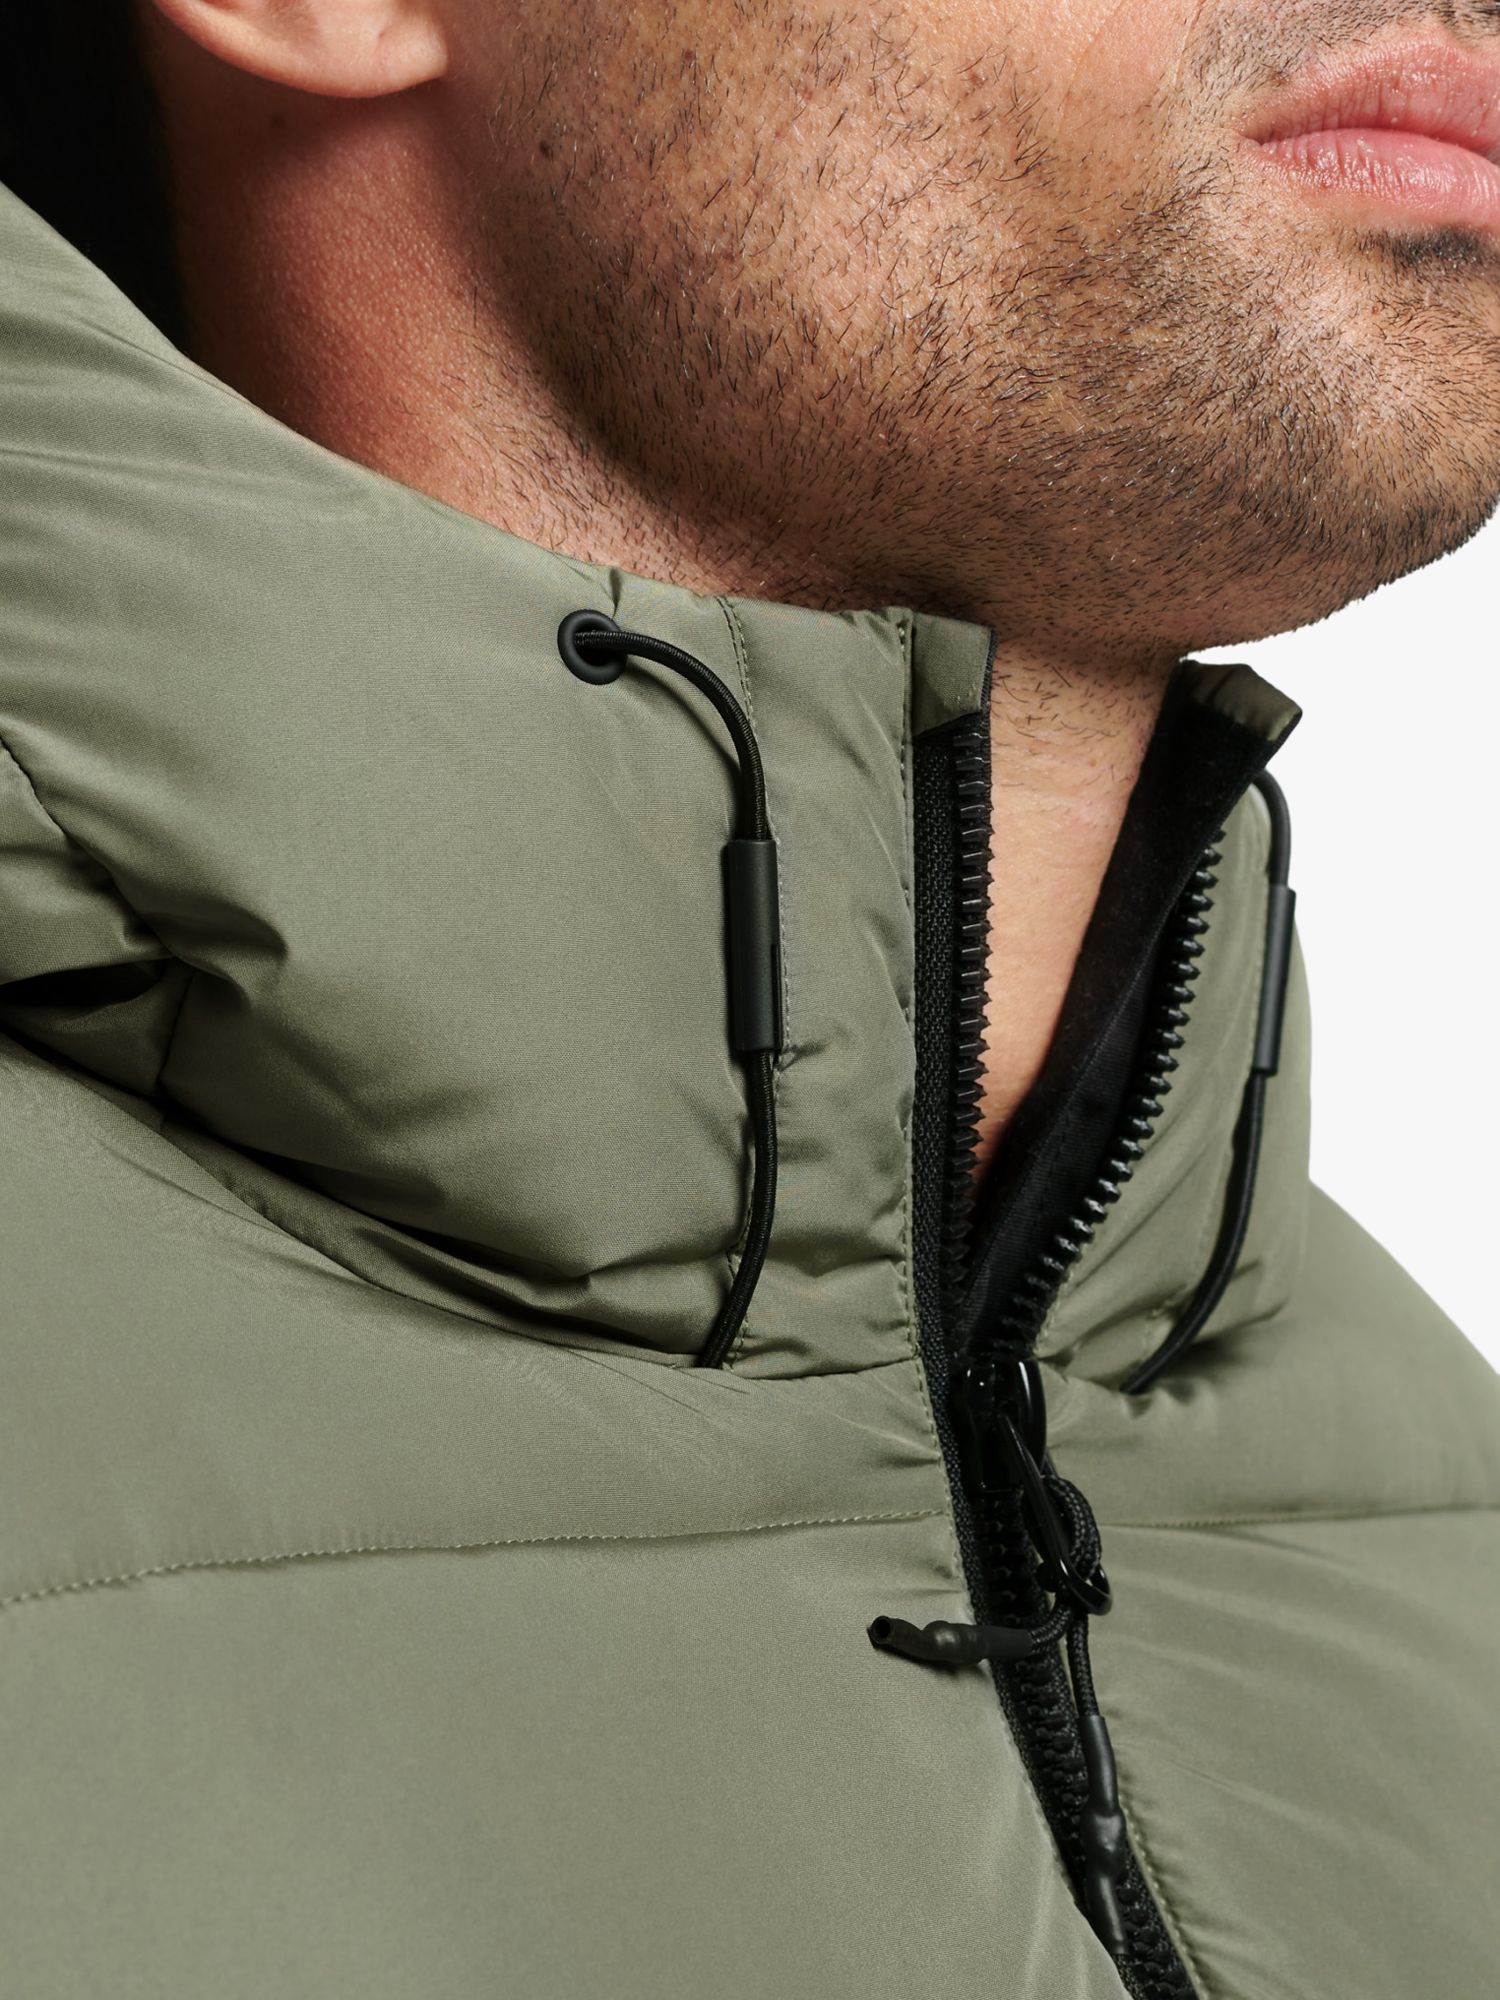 Superdry Sports Hooded Puffer Jacket, Dusty Olive at John Lewis & Partners